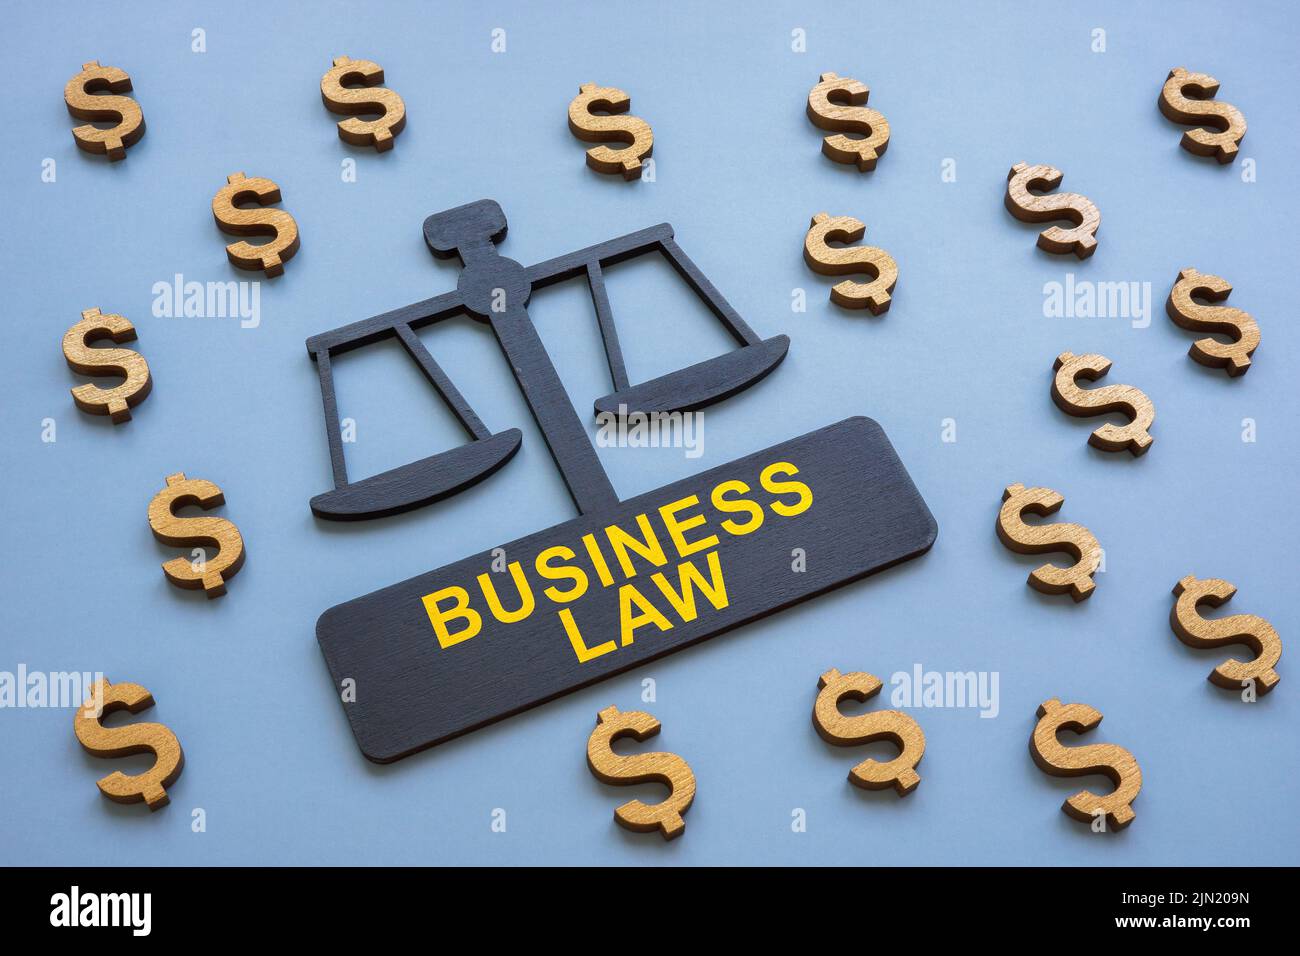 Plate in the form of scales and the inscription business law. Stock Photo